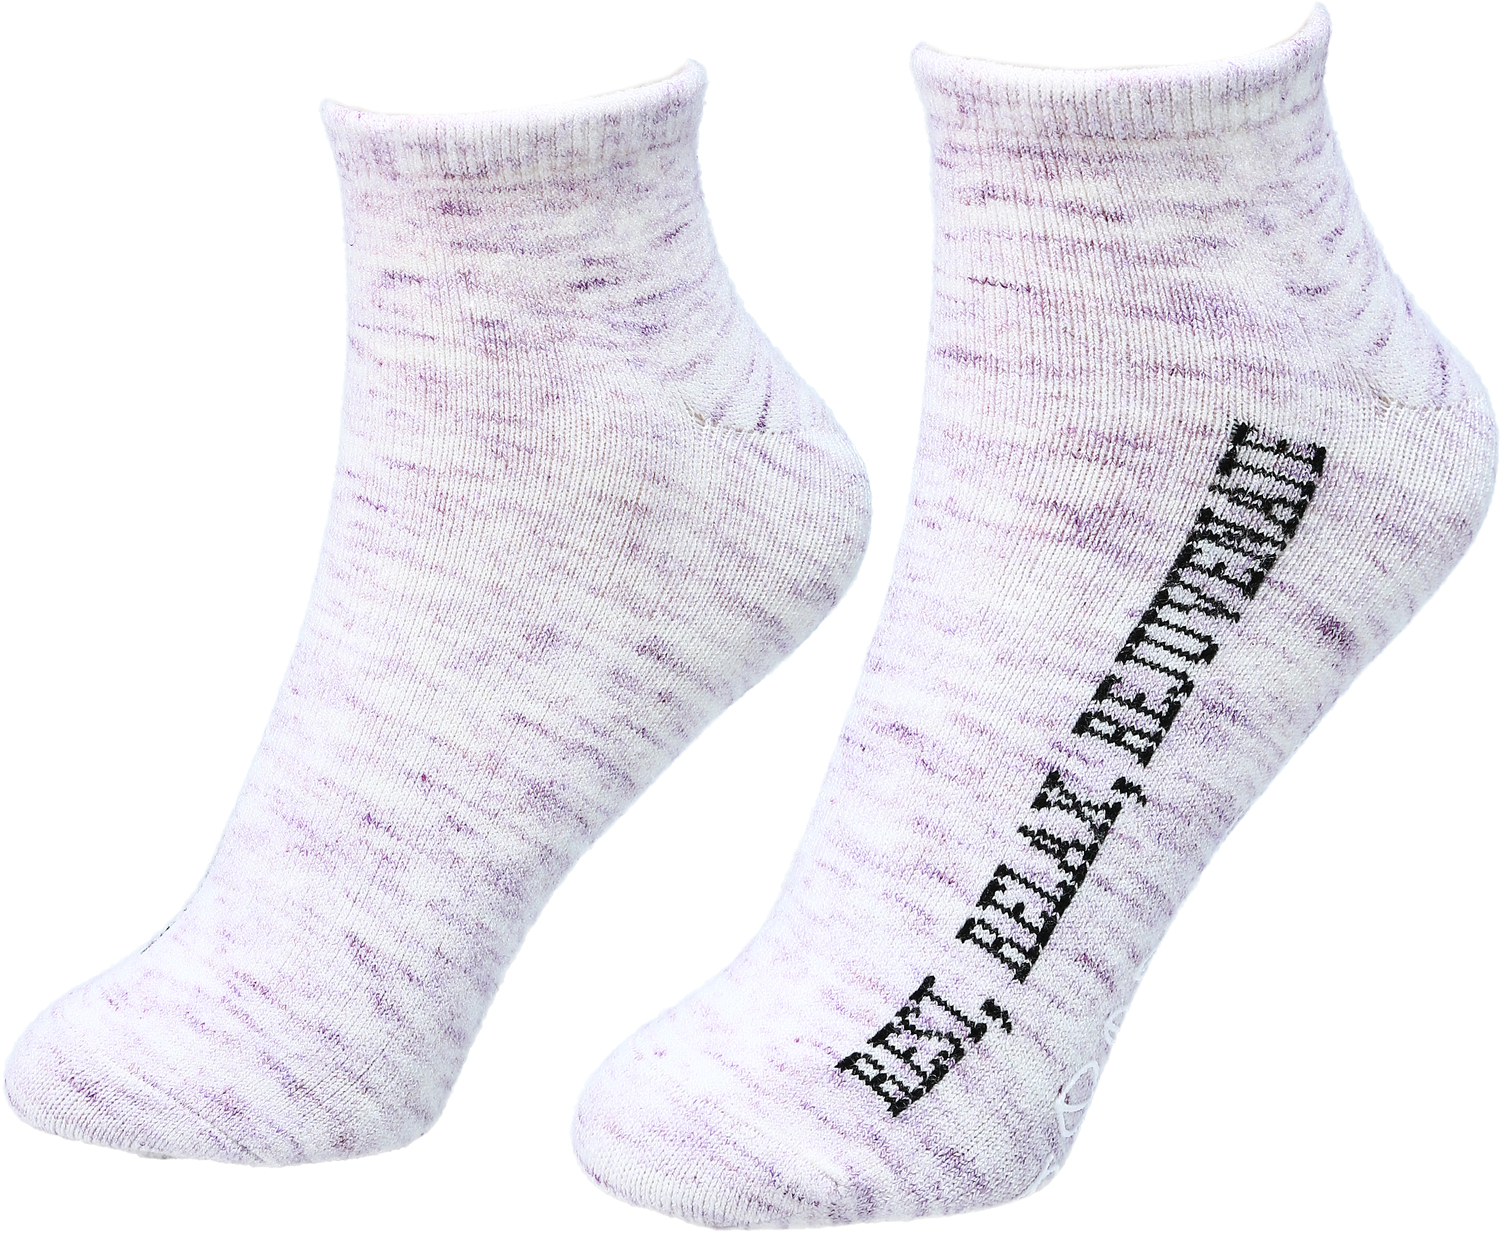 Relax by Faith Hope and Healing - Relax - Low Cut, Moisturizing Gel Socks
Scent: Light Lavender